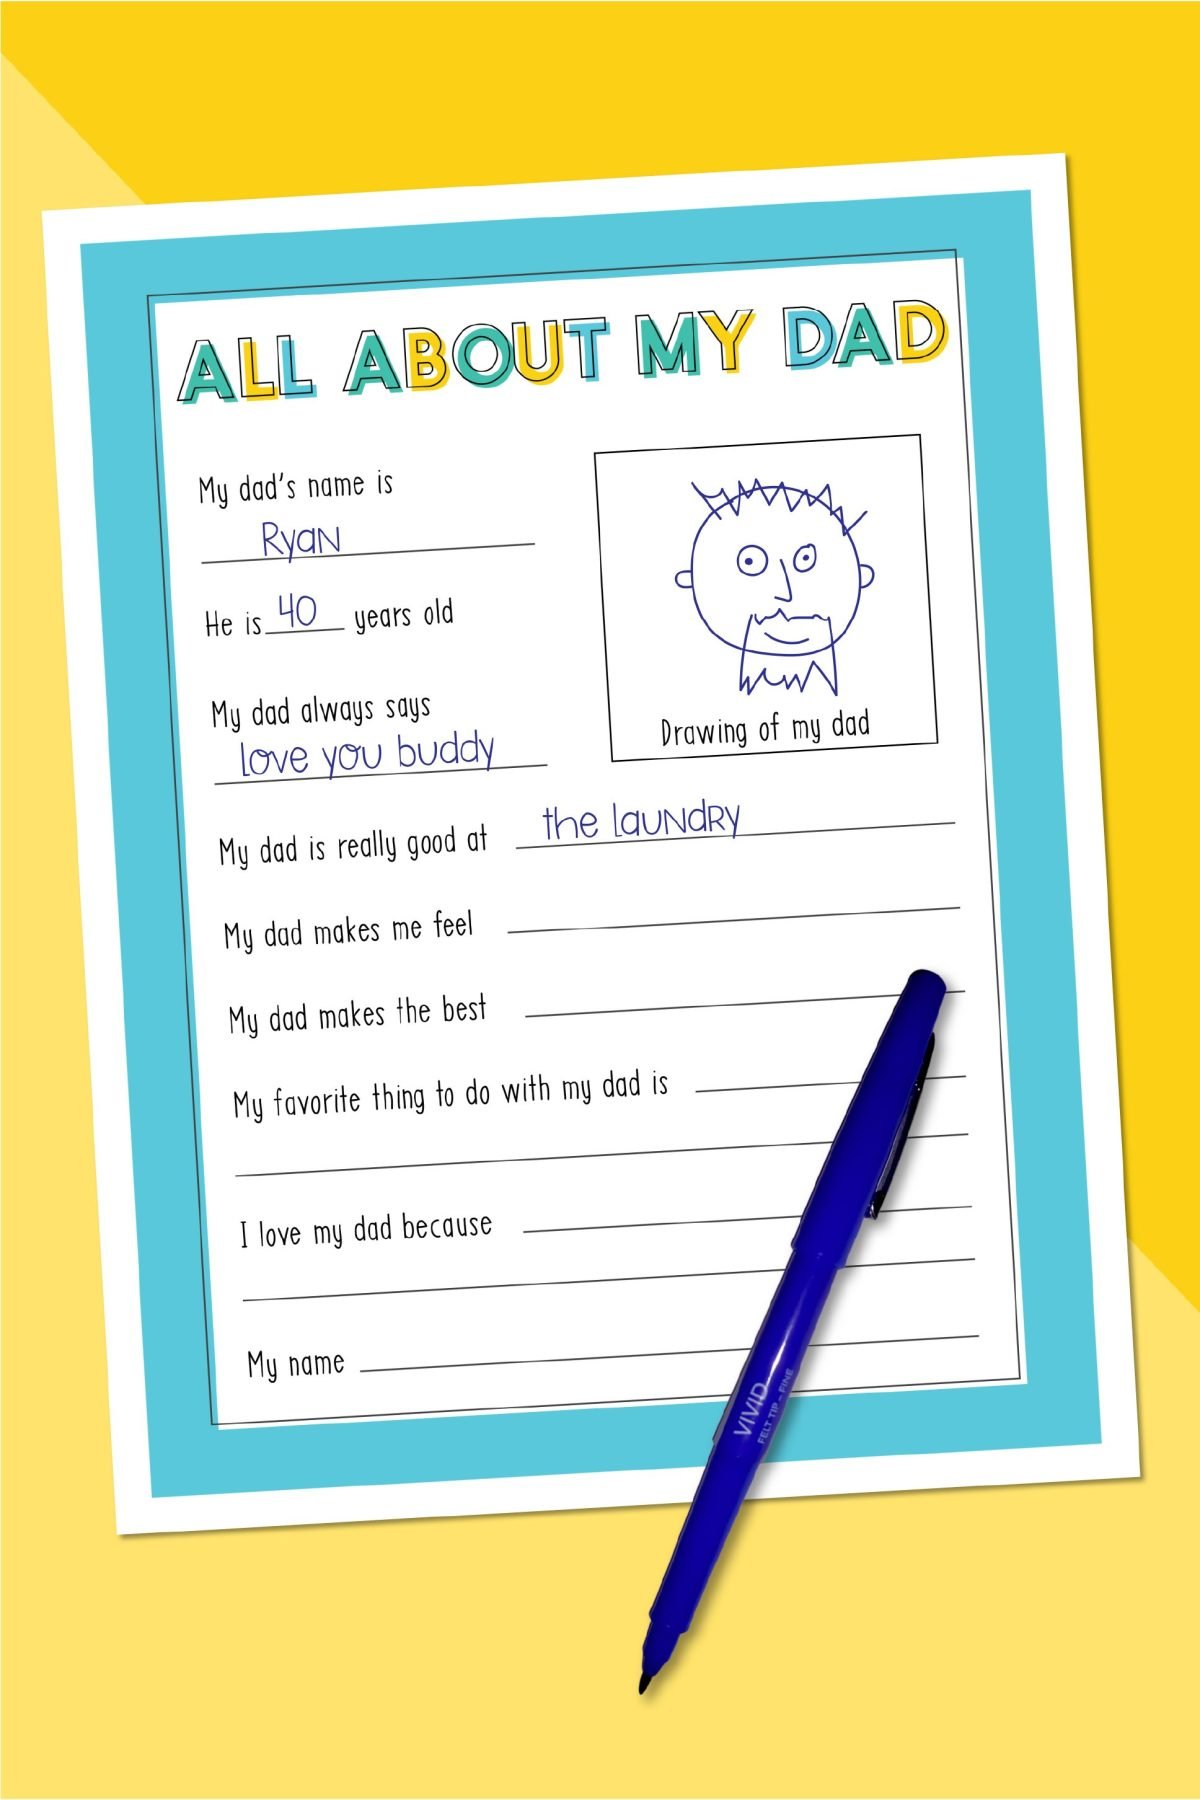 all-about-my-dad-pdf-printable-fathers-day-worksheet-for-kids-papa